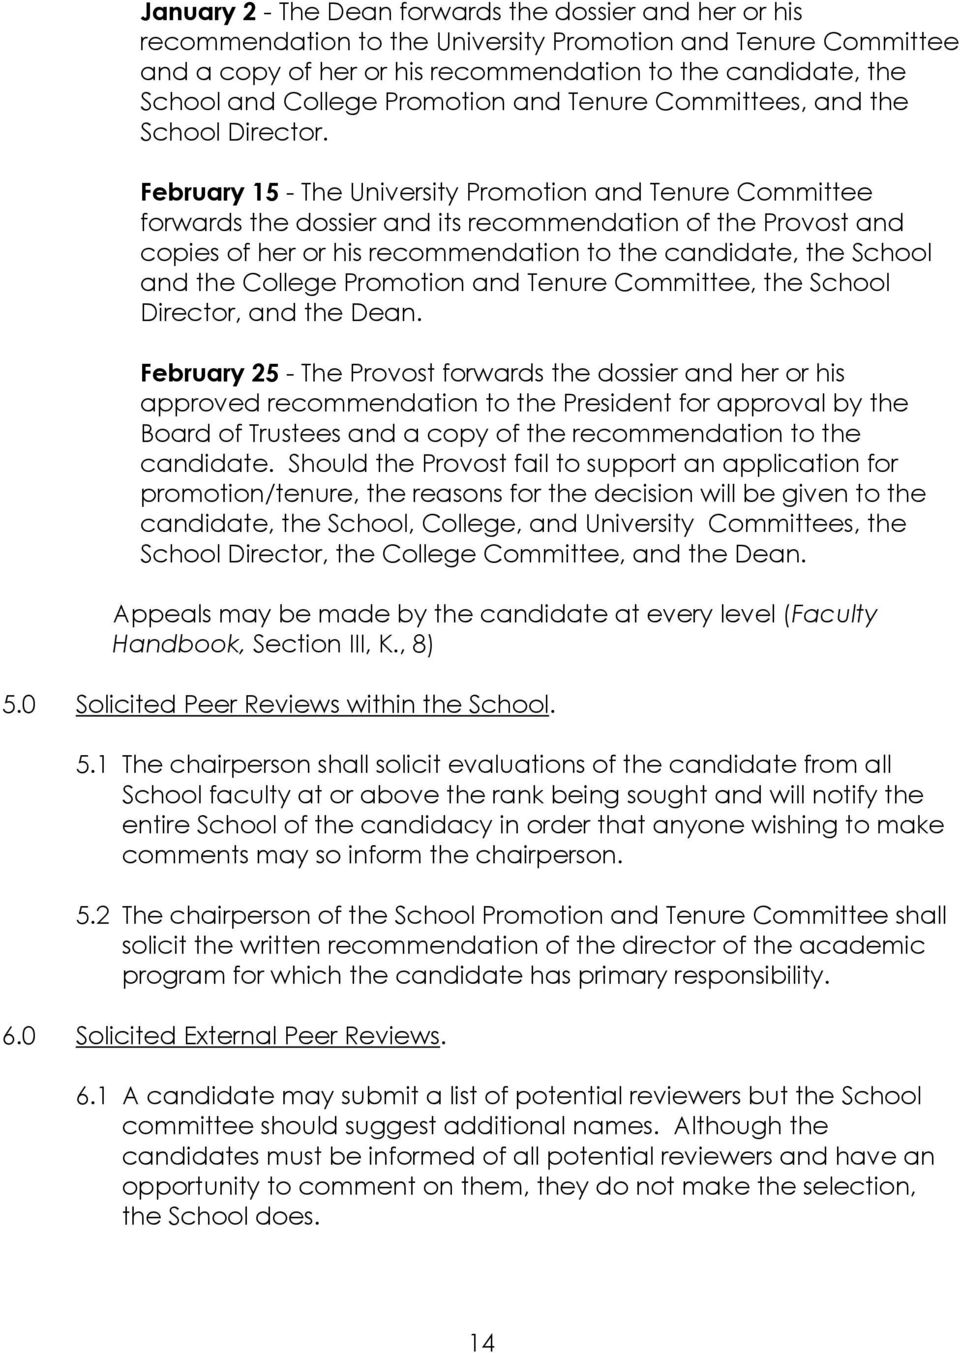 February 15 - The University Promotion and Tenure Committee forwards the dossier and its recommendation of the Provost and copies of her or his recommendation to the candidate, the School and the